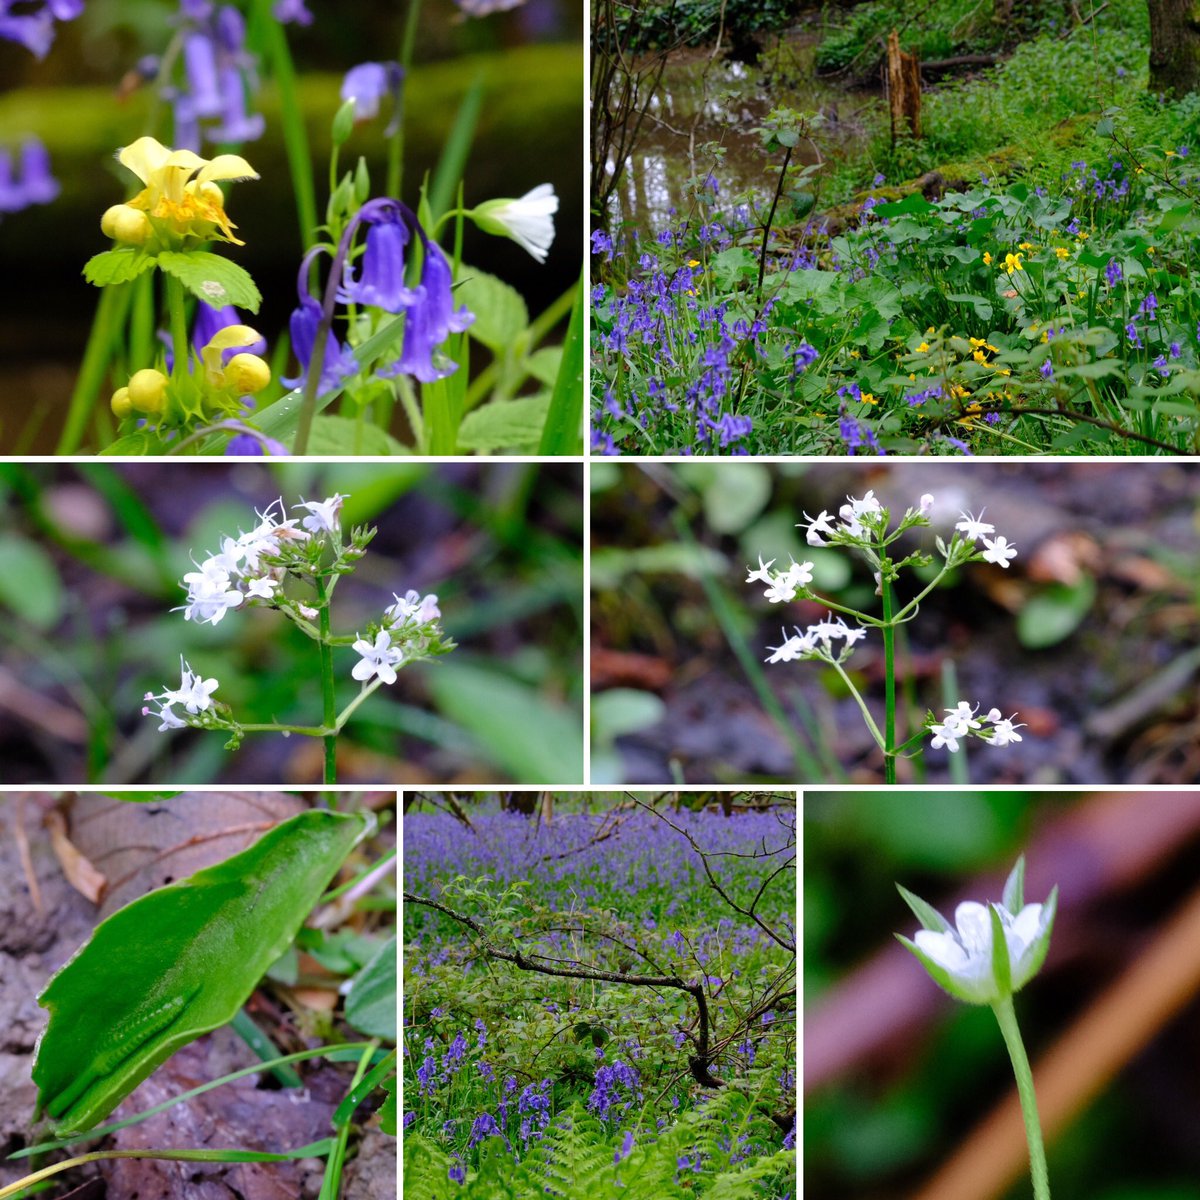 #wildflowerhour A visit to Weirwood nature reserve with the Friends of.   Highlights Alder Carr with Valeriana dioica.   Male plants I think. Plus 3 nerved Sandwort - poor pic so tiny.  Moehringia trinervia and Adders-Tongue Fern - a bit nibbled.